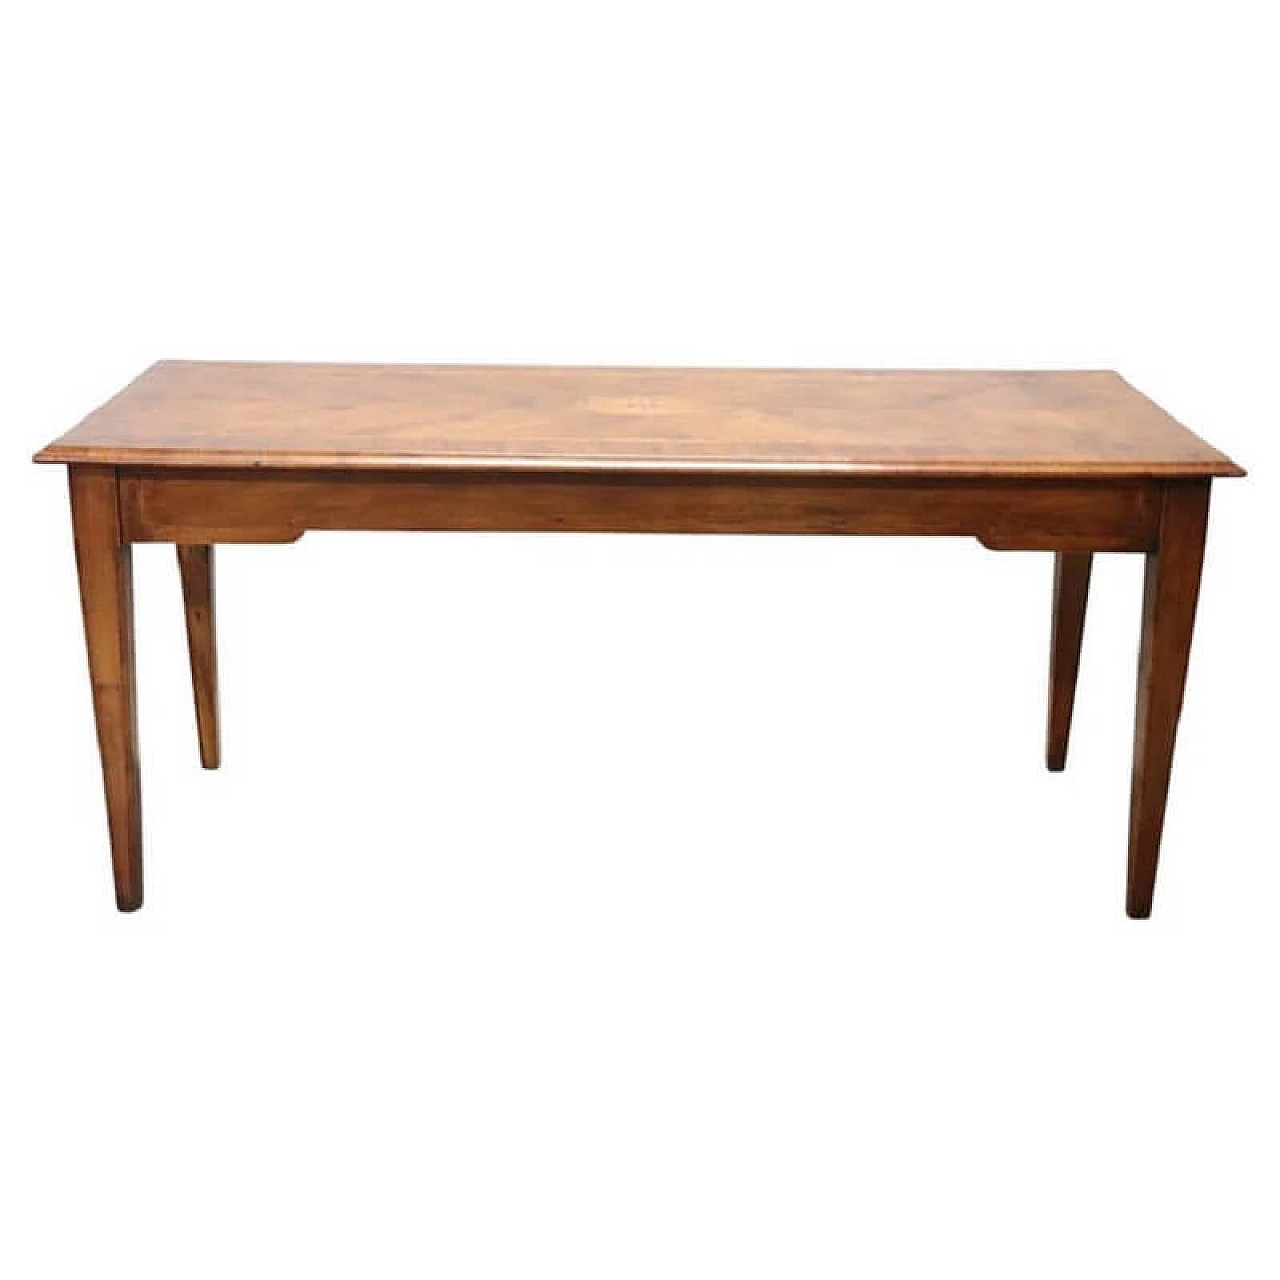 Rectangular inlaid walnut dining table, first half of the 19th century 1